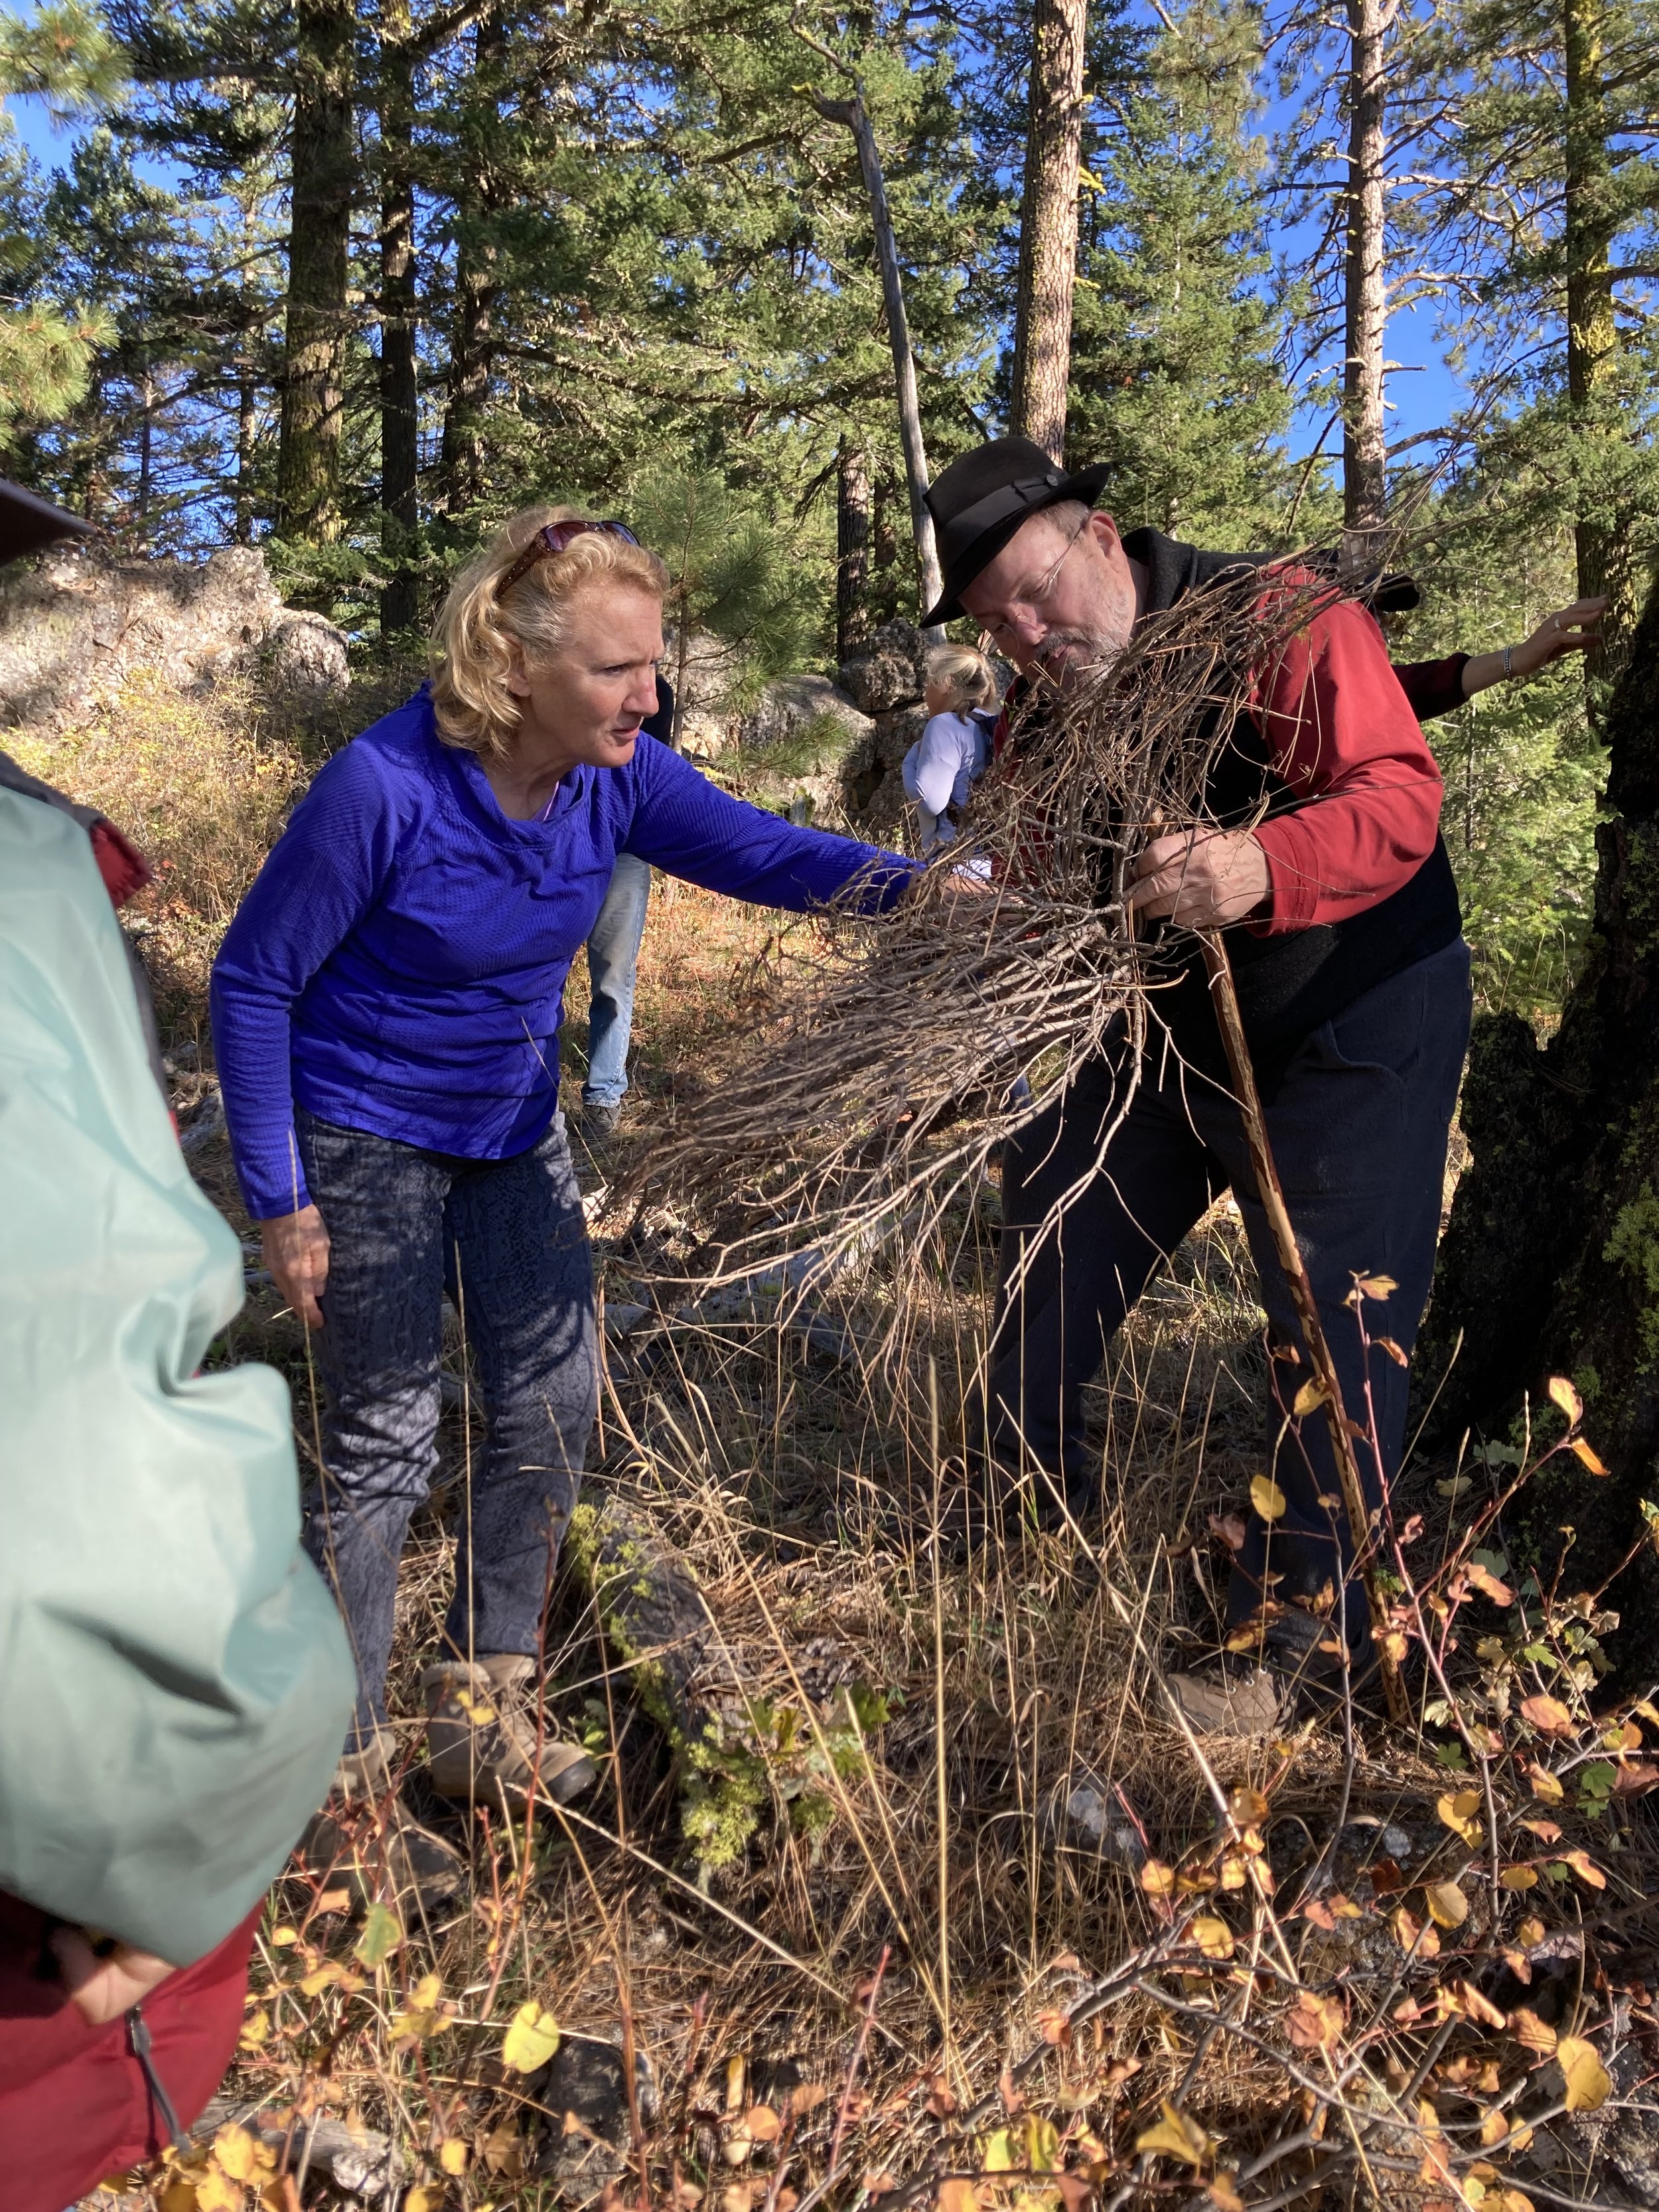   Examining a fallen limb grown into a “Witch’s Broom” due to a parasitic mistletoe  